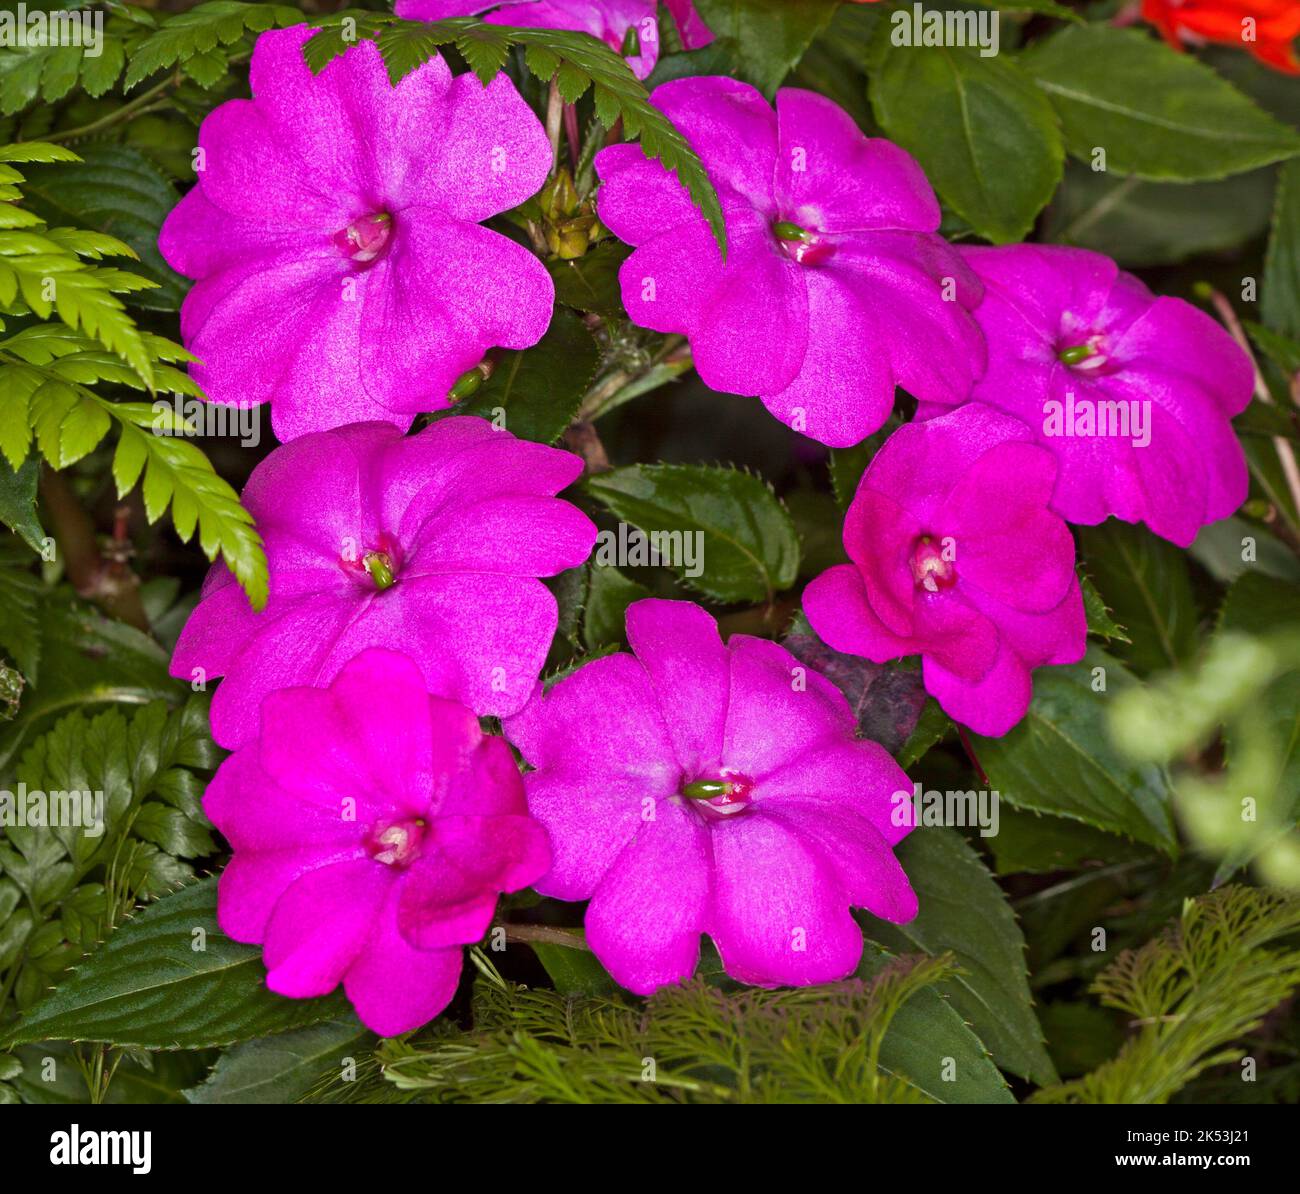 Cluster of large vivid magenta pink / red flowers of Impatiens hawkerii New Guinea hybrid 'Magnum' on background of green leaves Stock Photo